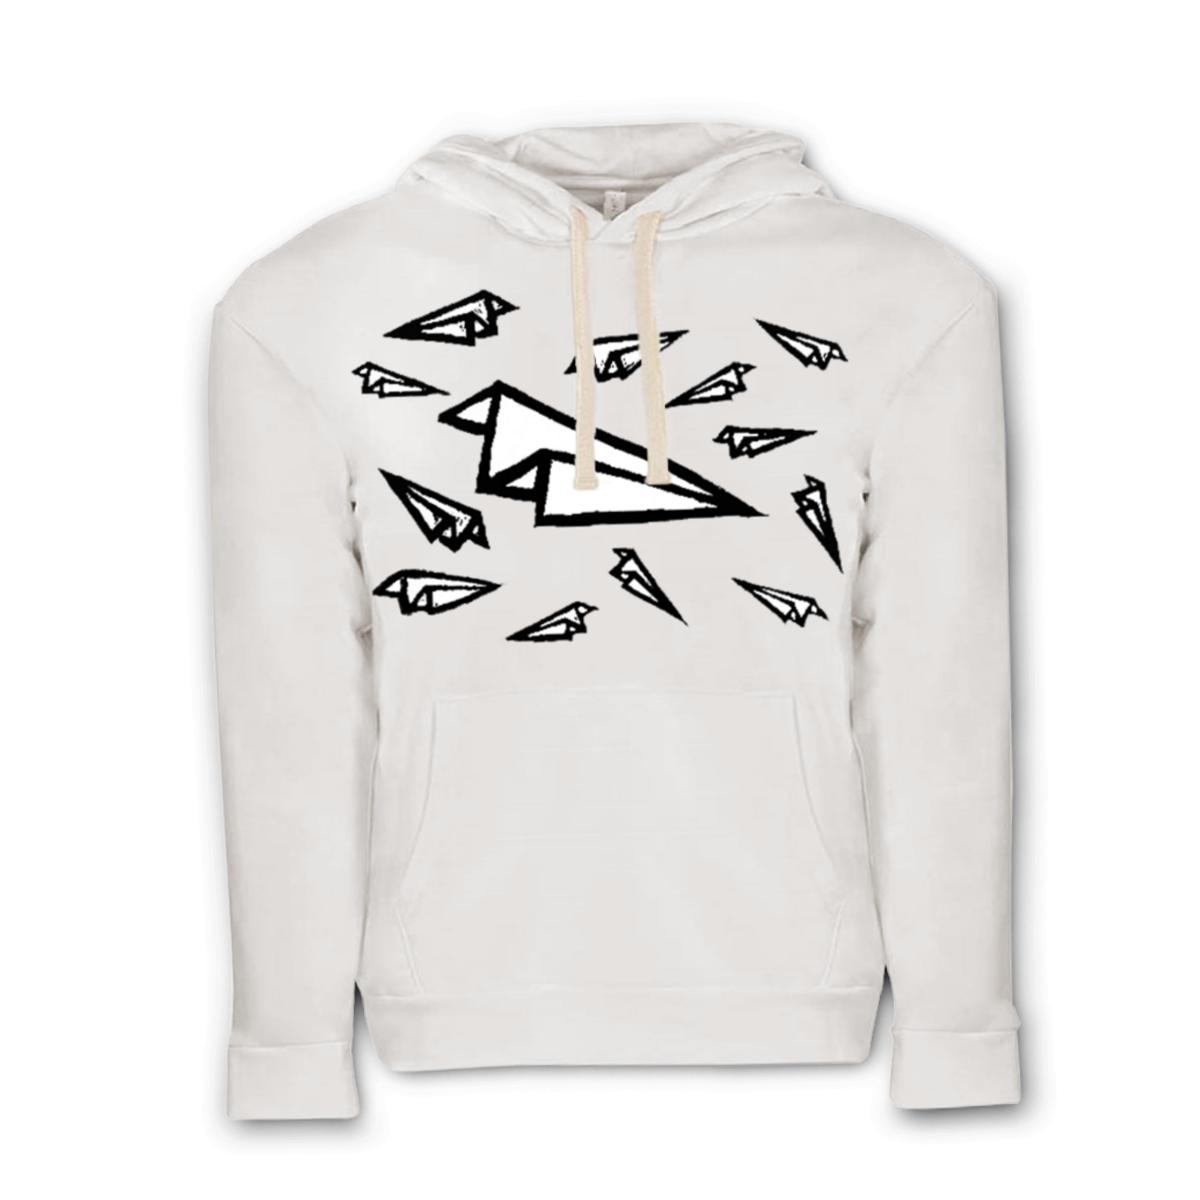 Airplane Frenzy Unisex Pullover Hoodie Extra Large white